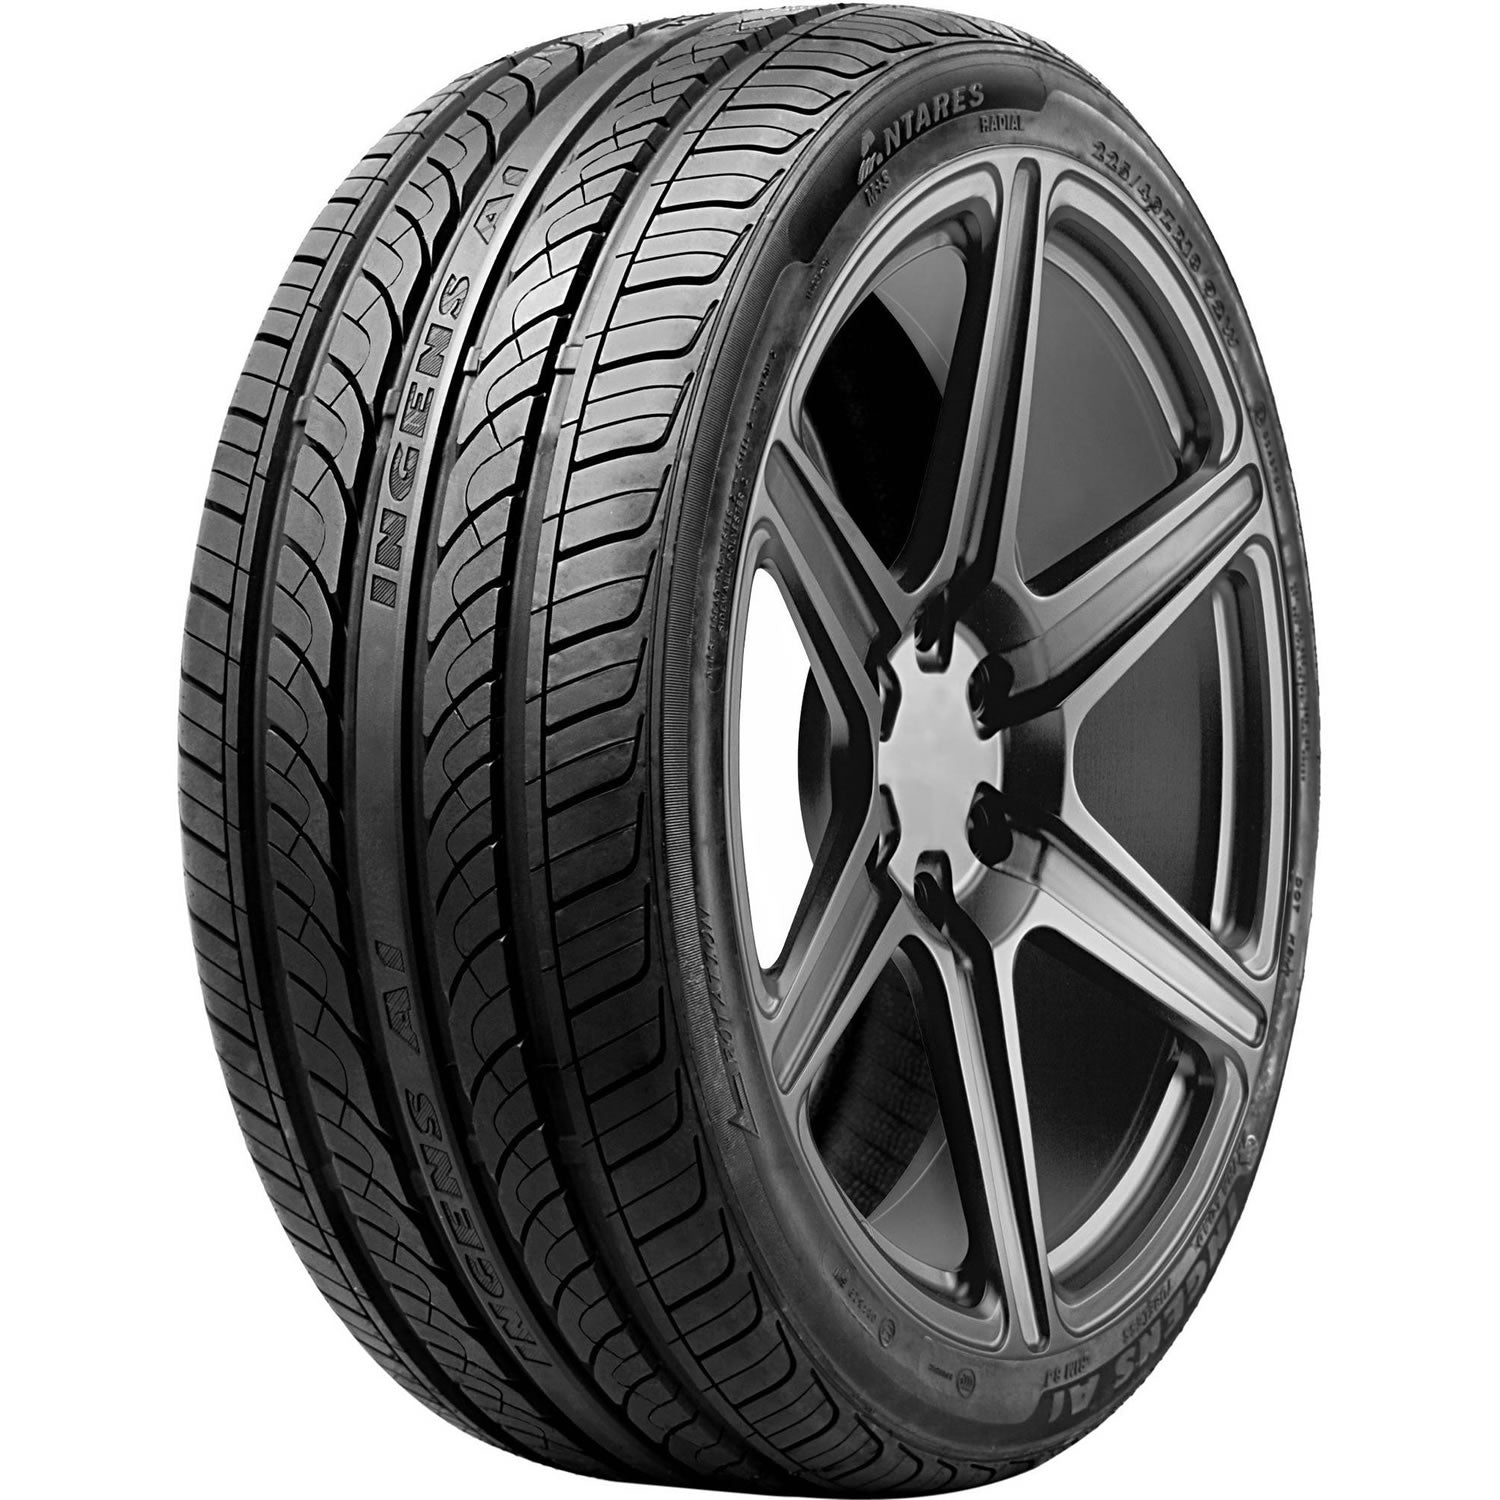 ANTARES INGENS A1 205/55R16 (24.9X8.1R 16) Tires